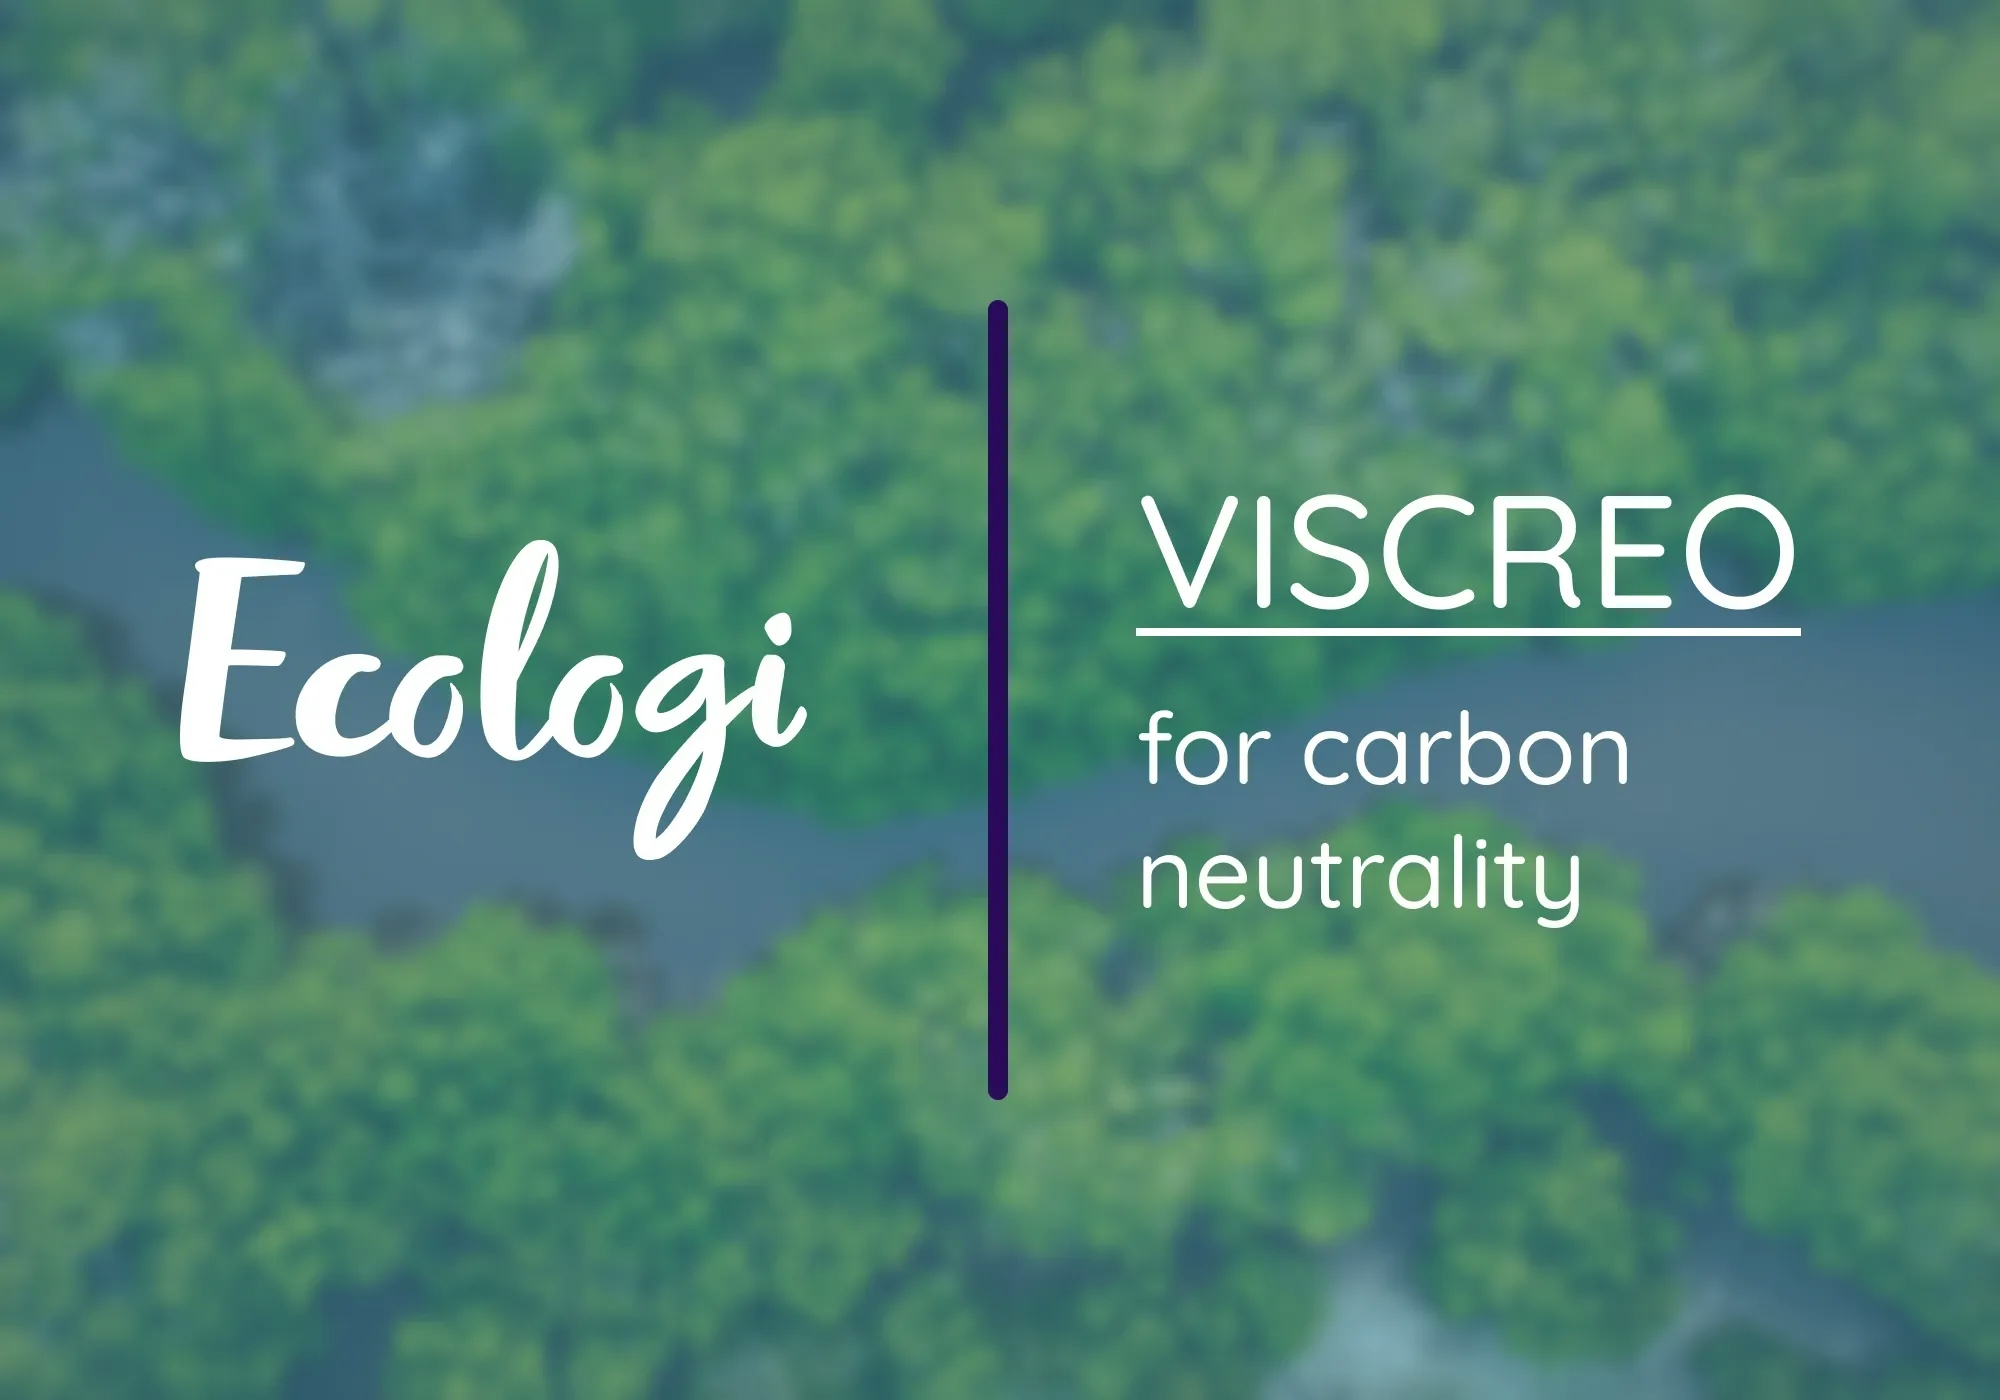 Ecologi and VISCREO logo on background of forest